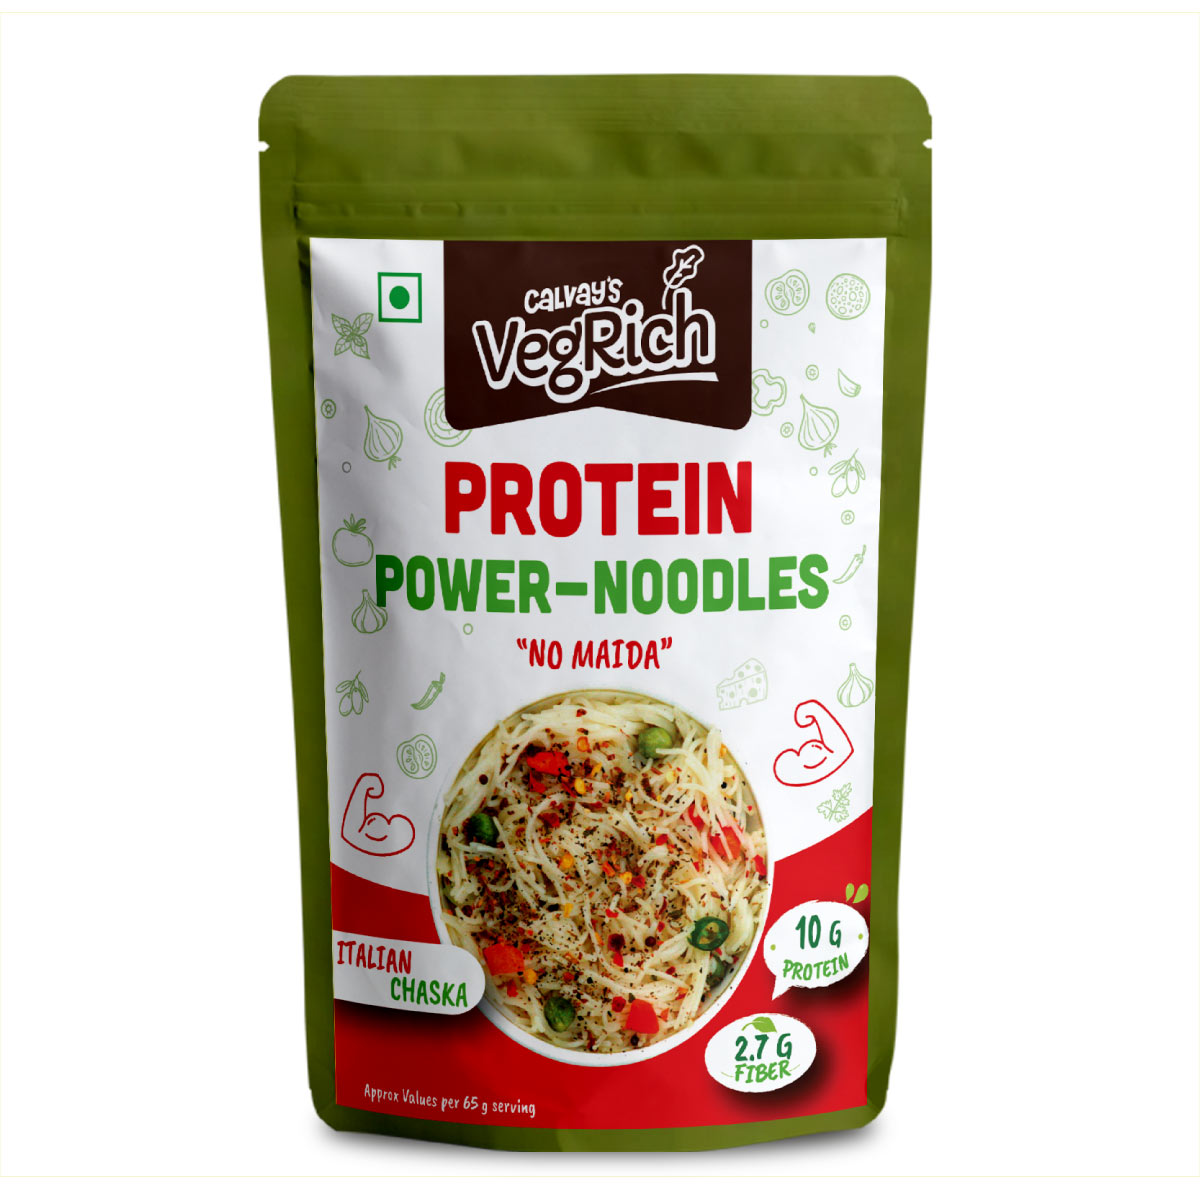 Calvay's VegRich Protein Power Noodles front view white background